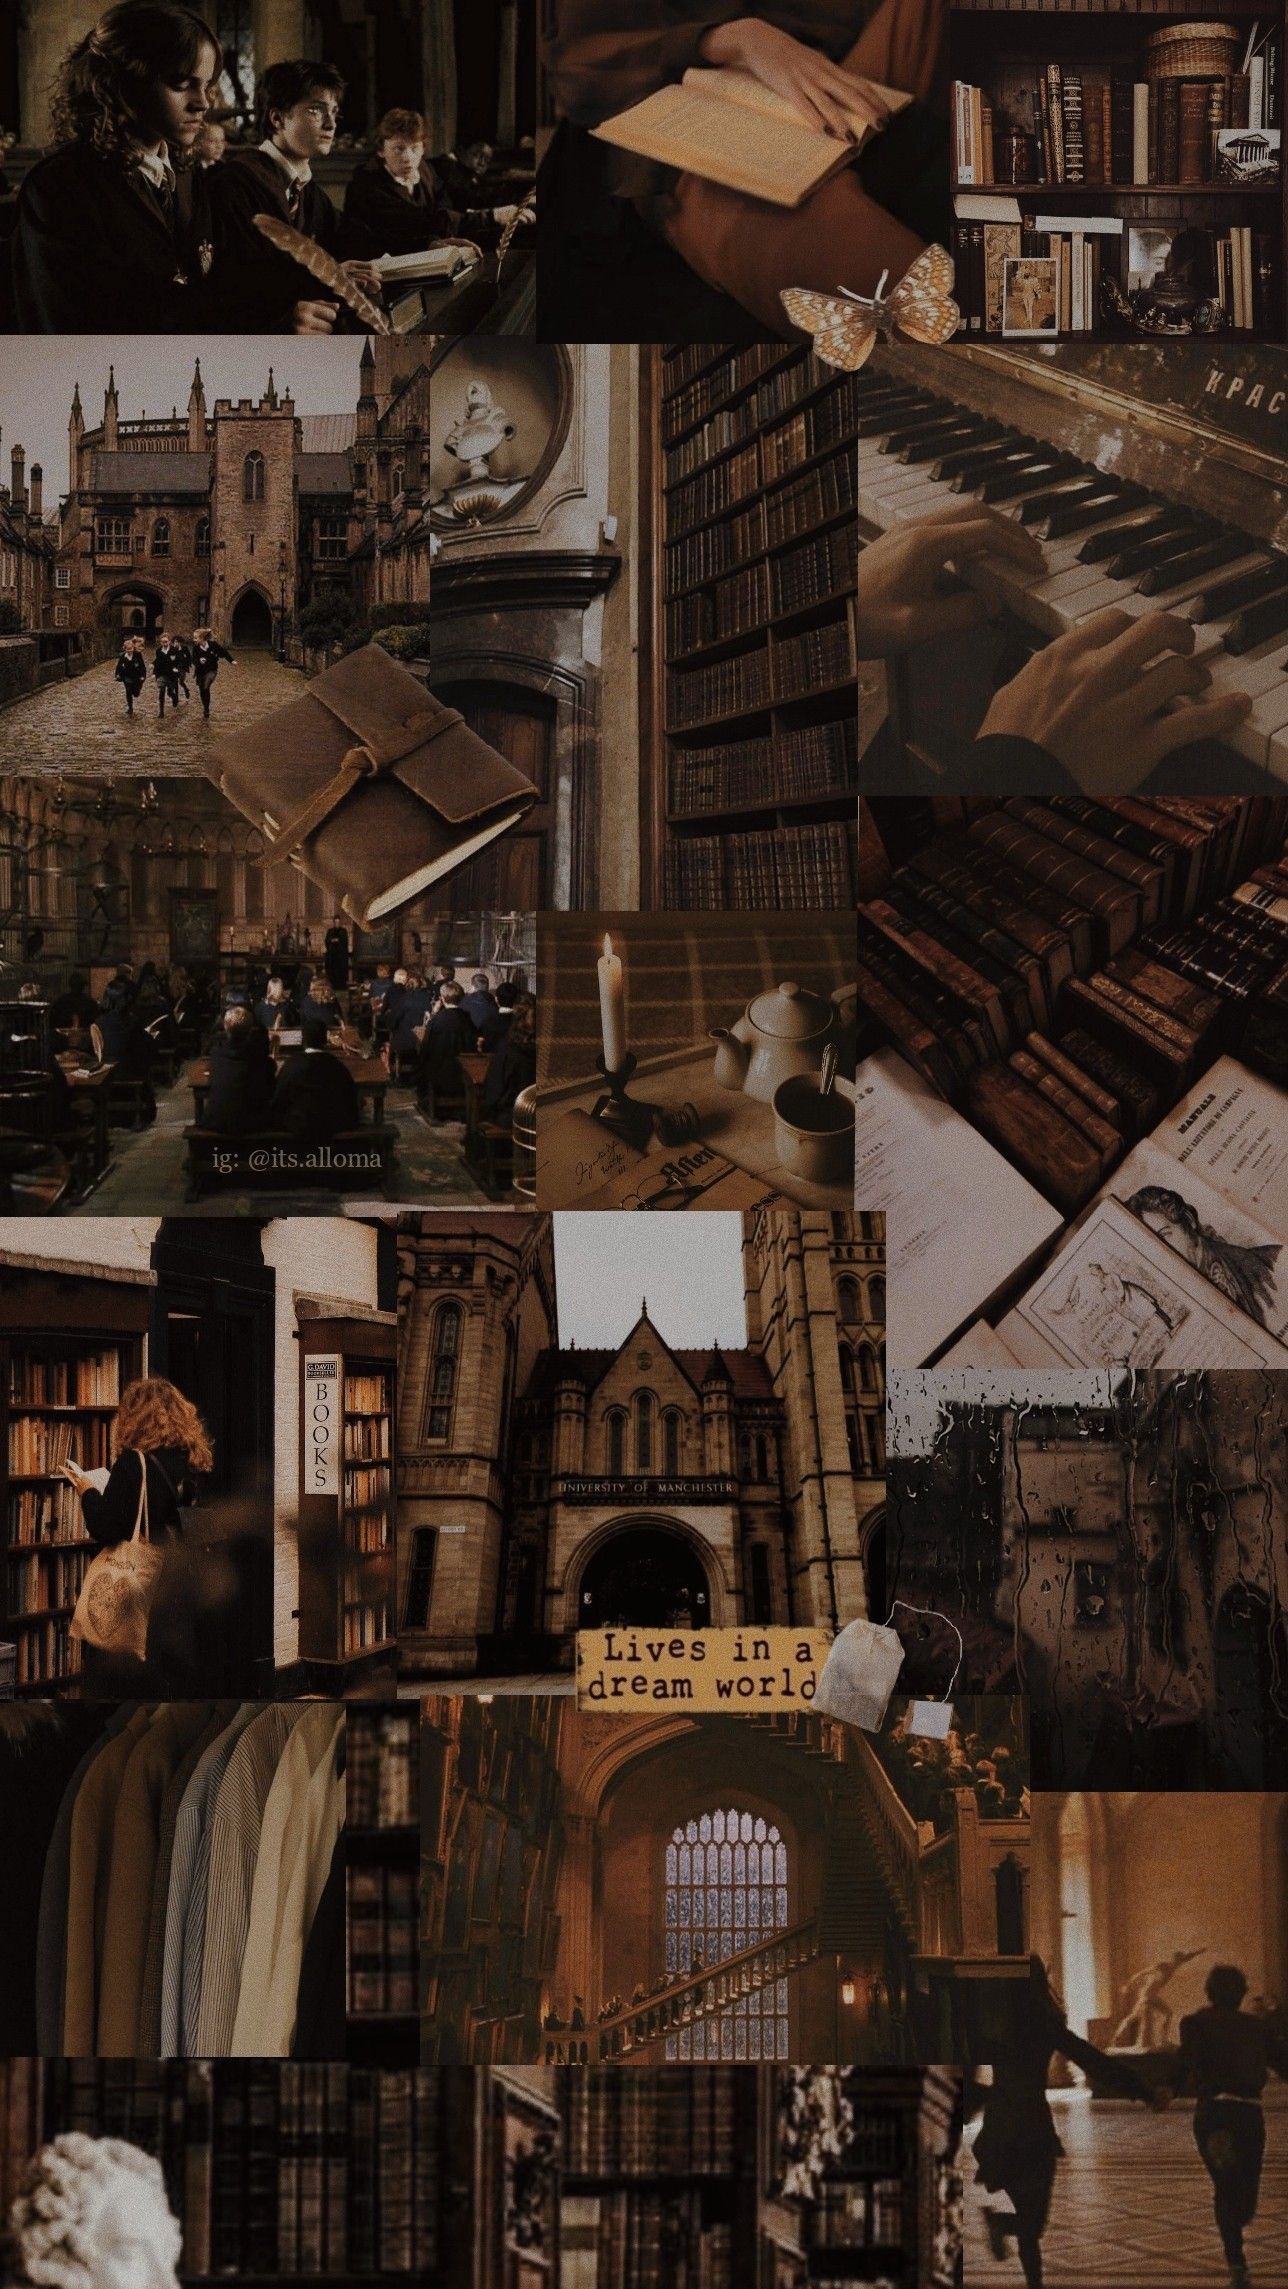 Aesthetic collage of Harry Potter images including Hogwarts, bookshelves, and students. - Dark academia